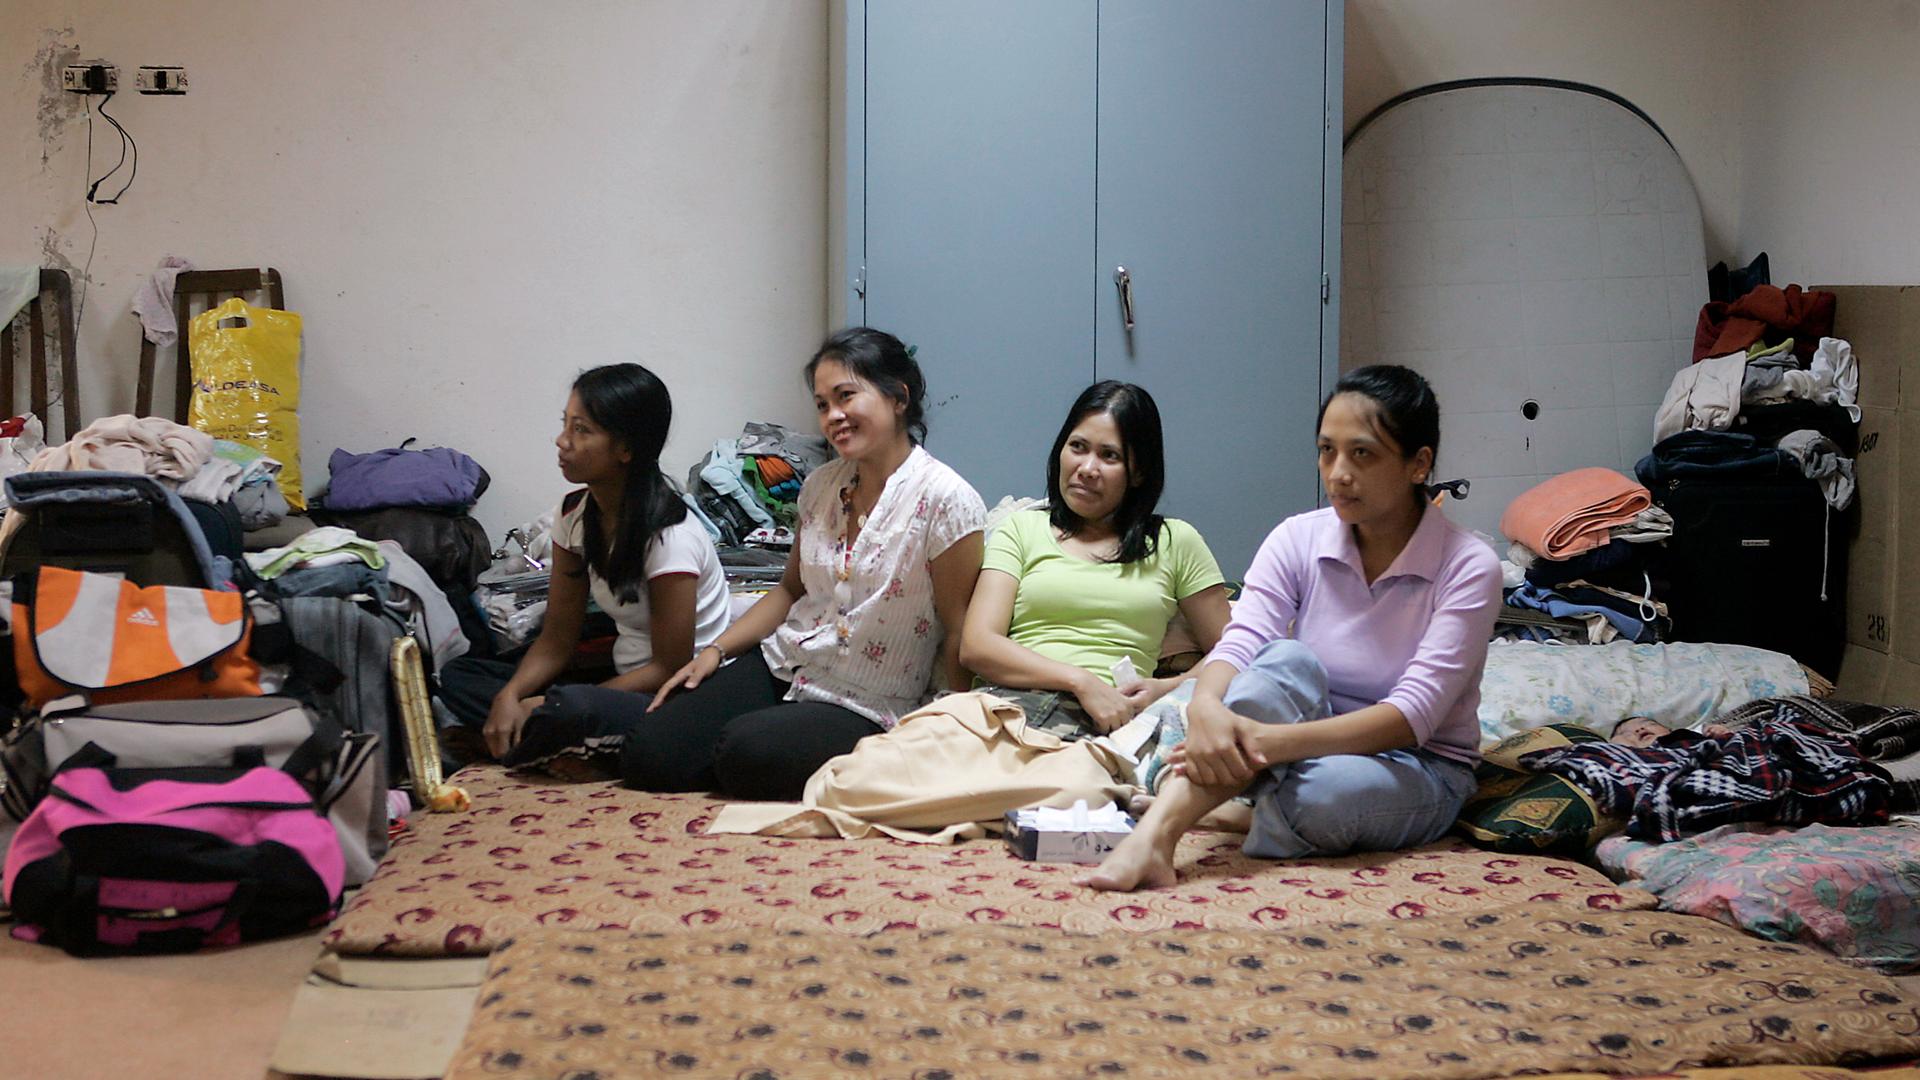 Four women sit crosslegged on the floor of a windowless room. Around them are suitcases and bedding. A baby is wrapped in a blanket nearby.